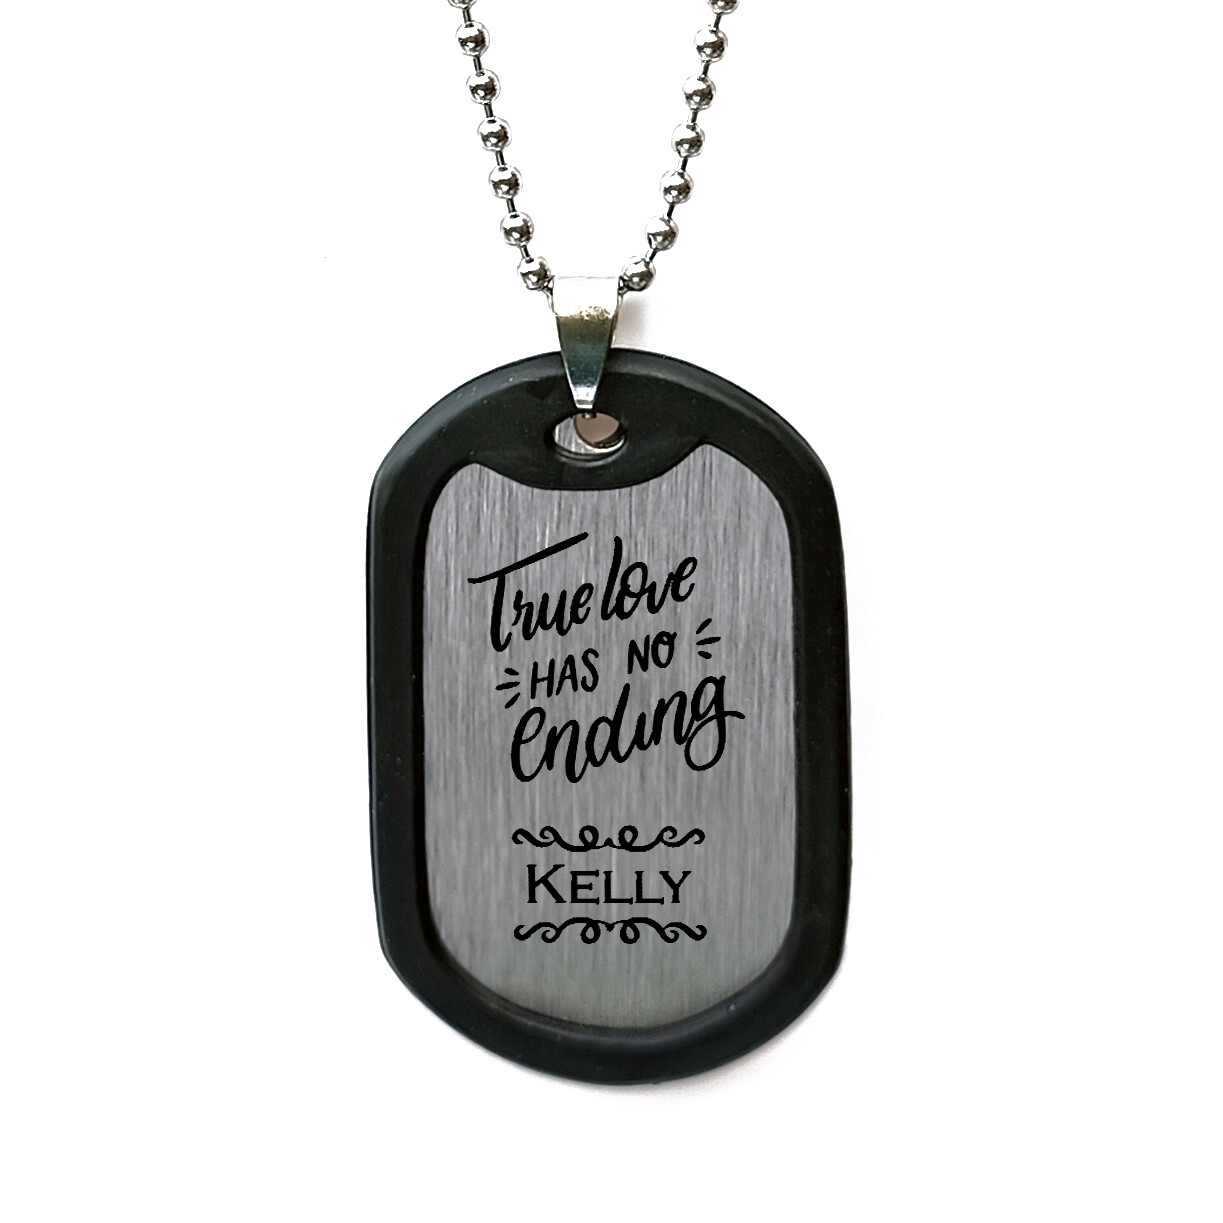 Personalised Engraved 'True love has no ending' Necklace